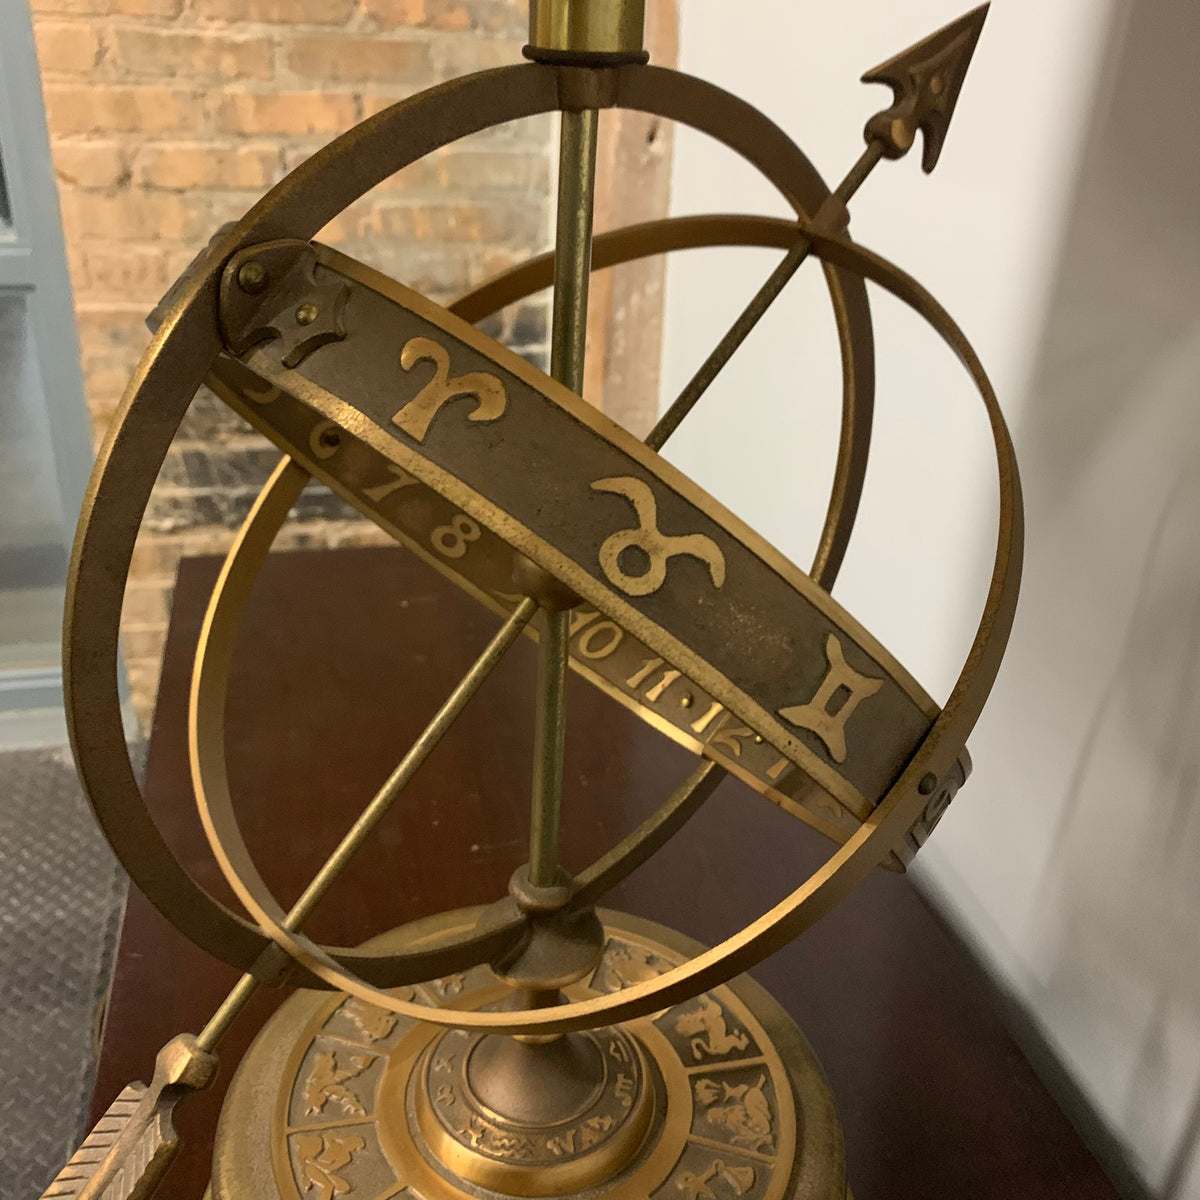 Bronze Astrological Armillary Table Lamp by Frederick Cooper Lamp Co.